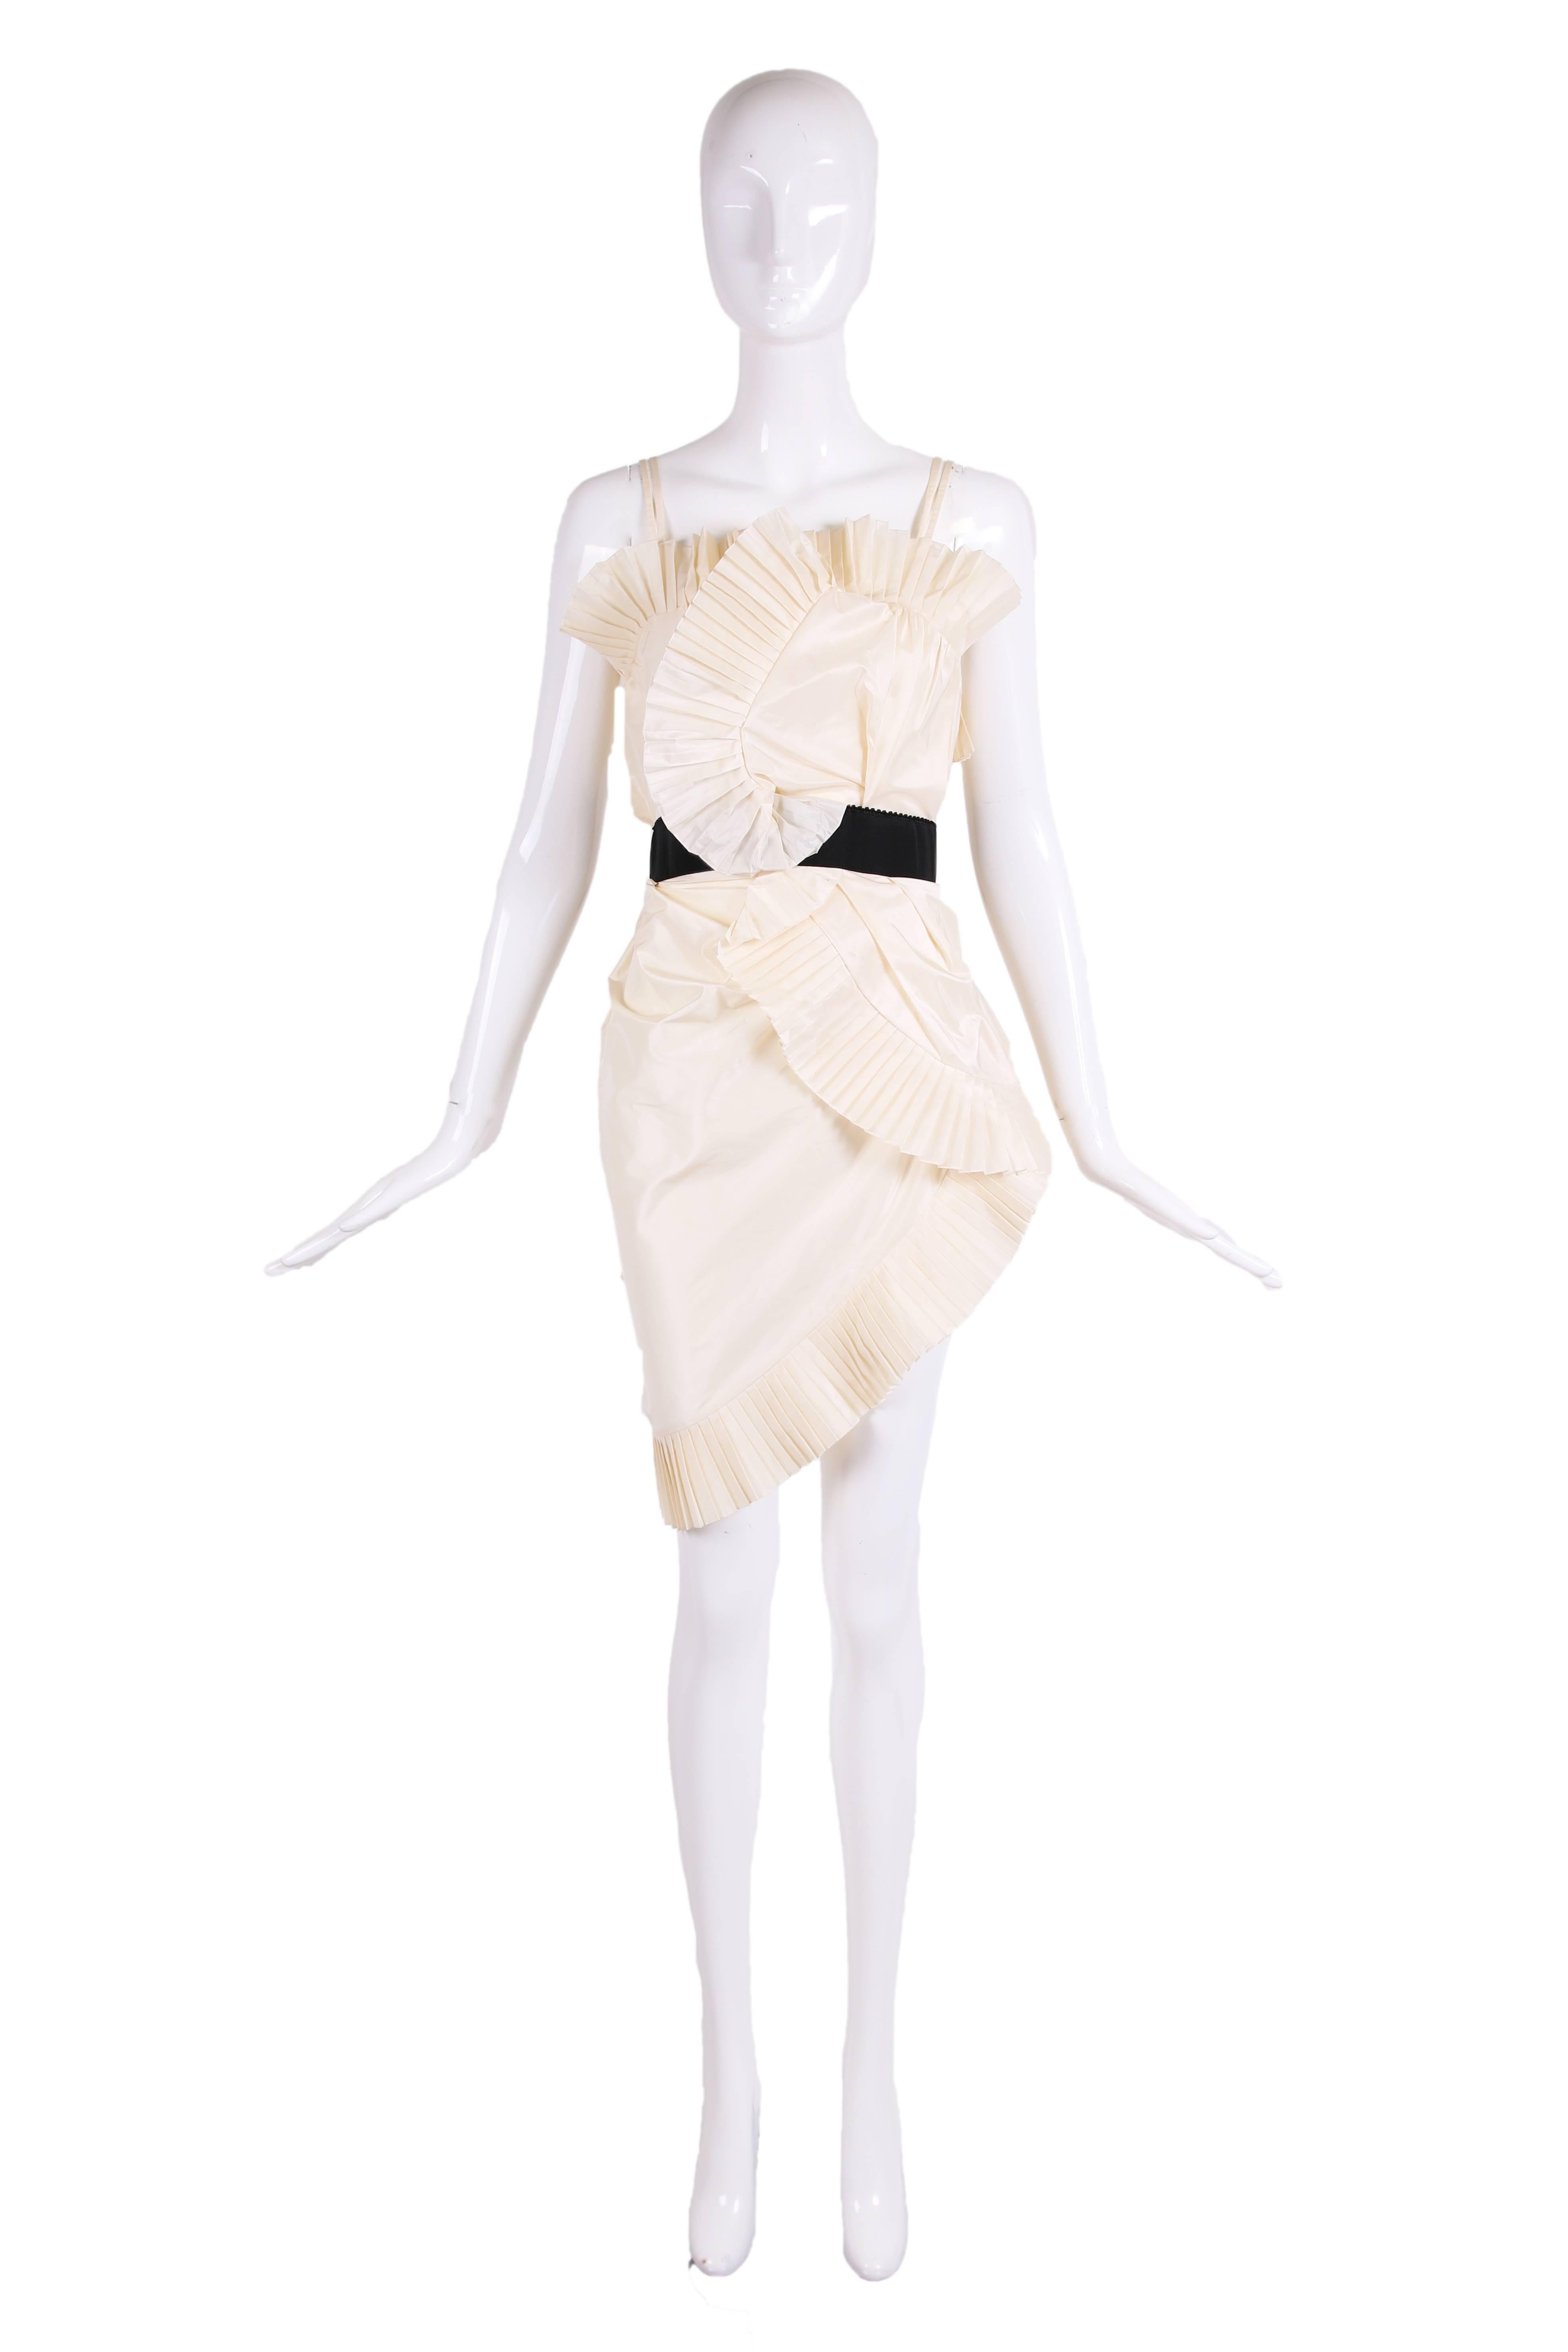 Incredible Christian Dior cocktail dress by John Galliano made of creme silk taffeta fabric and pleated trim. In excellent condition - US size 6 but it appears to fit more like a size 4 or size 2 - please consult measurements.